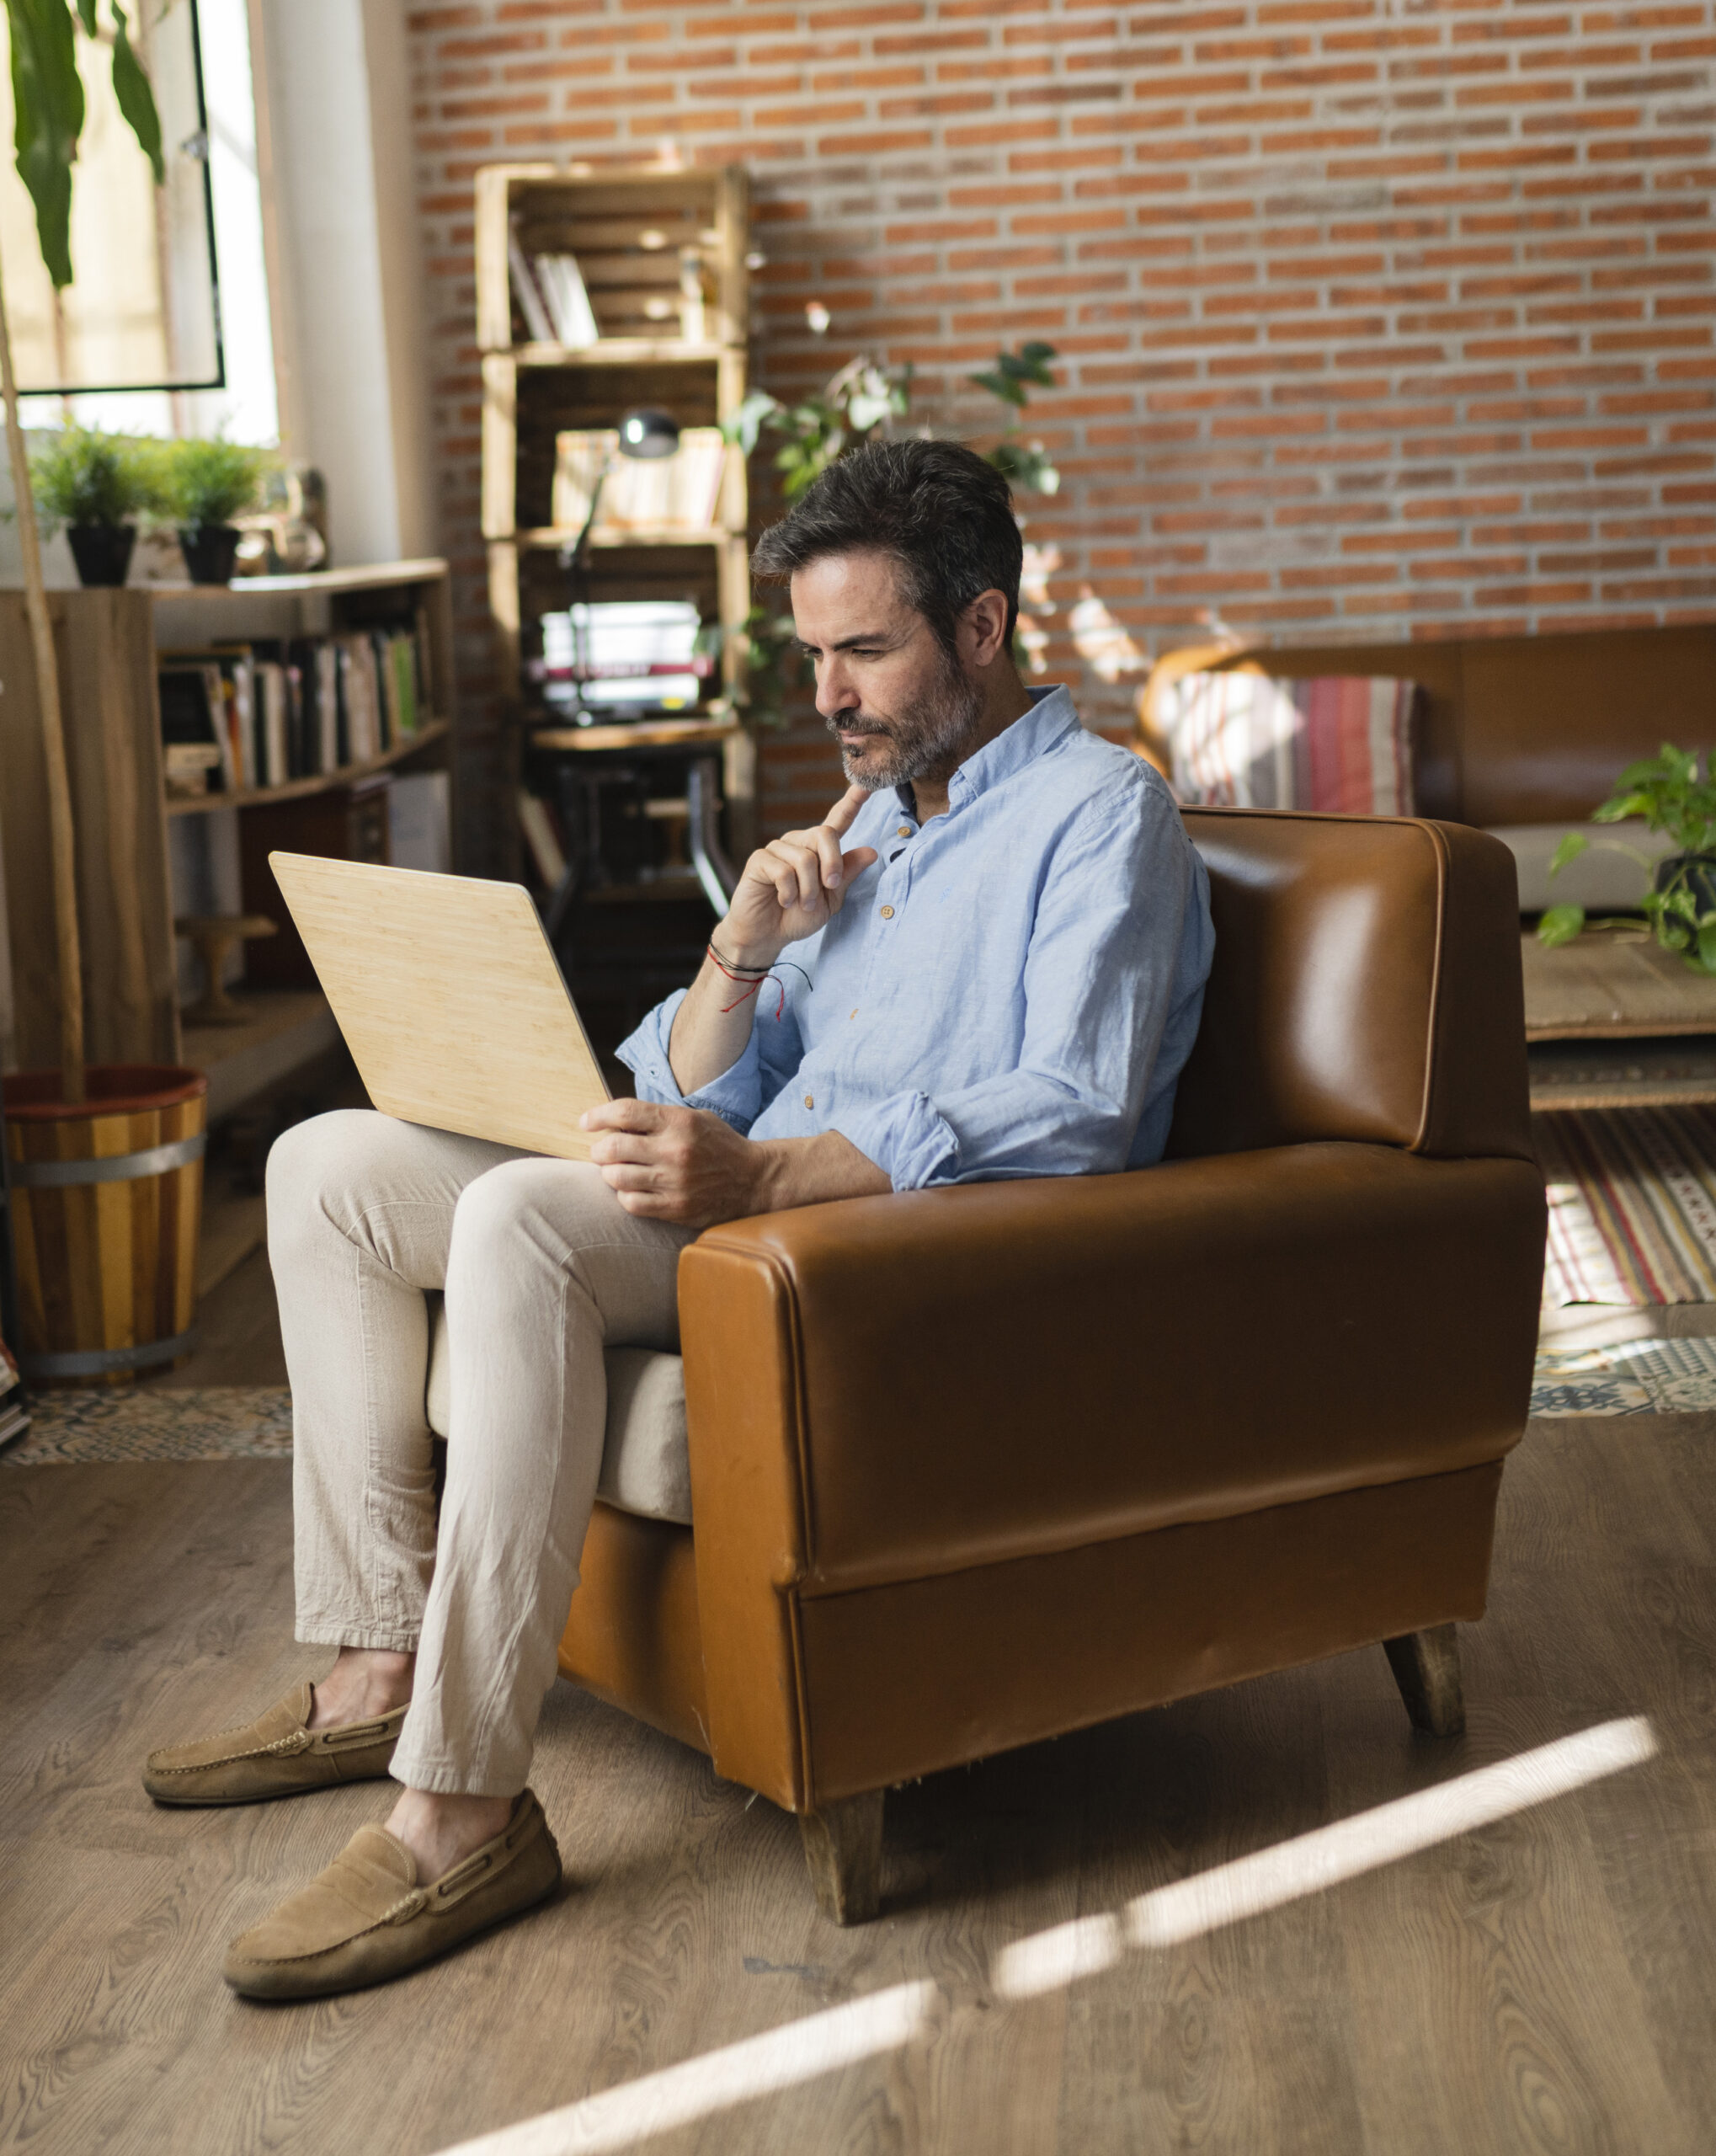 A man engages with his laptop while seated in a leather chair, pondering common 401(k) inquiries.